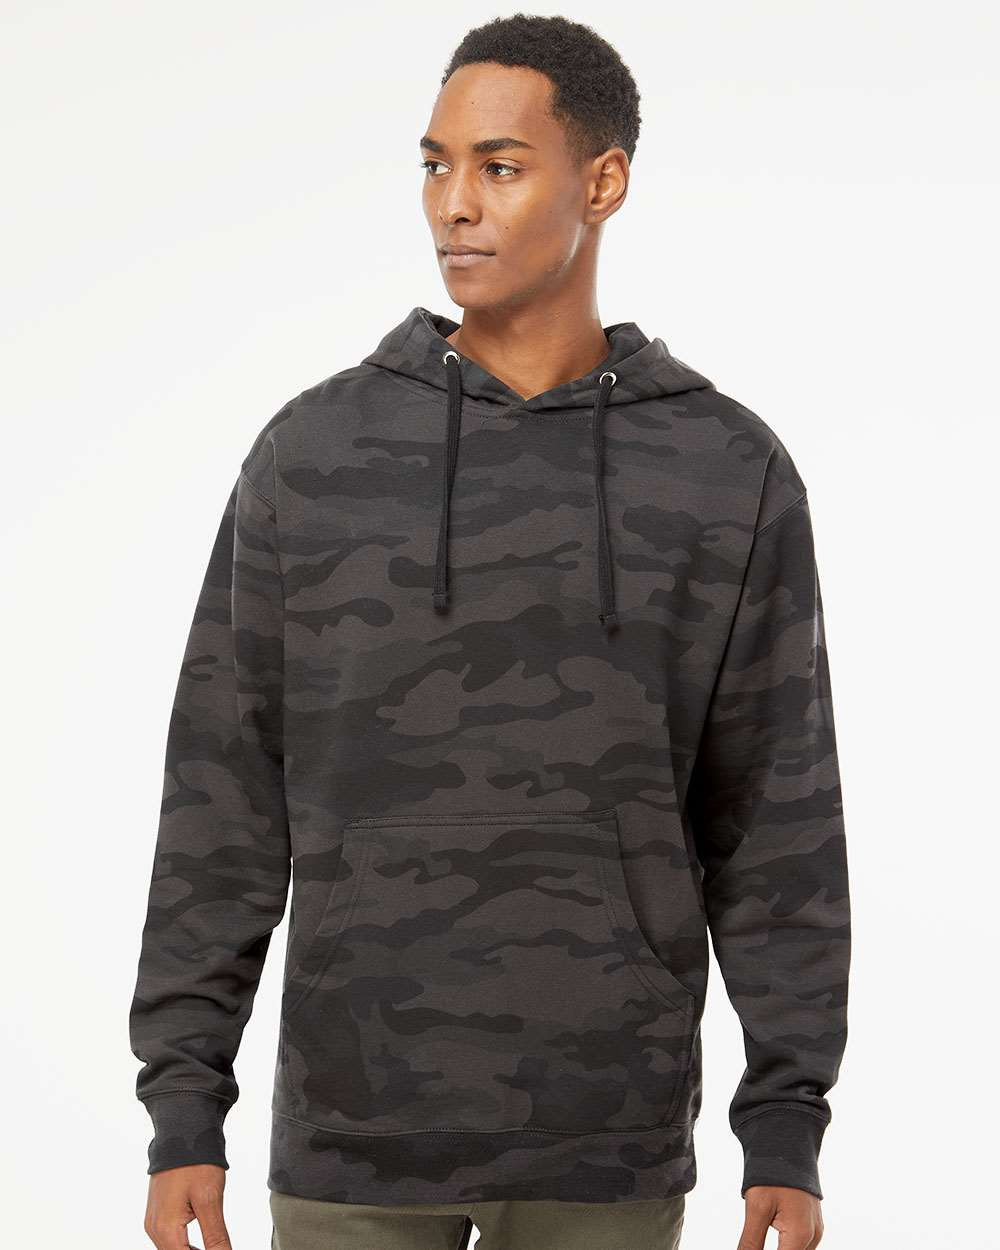 Midweight Hooded Pullover Sweatshirts  Best Value Midweight Hoodie -  Independent Trading Company